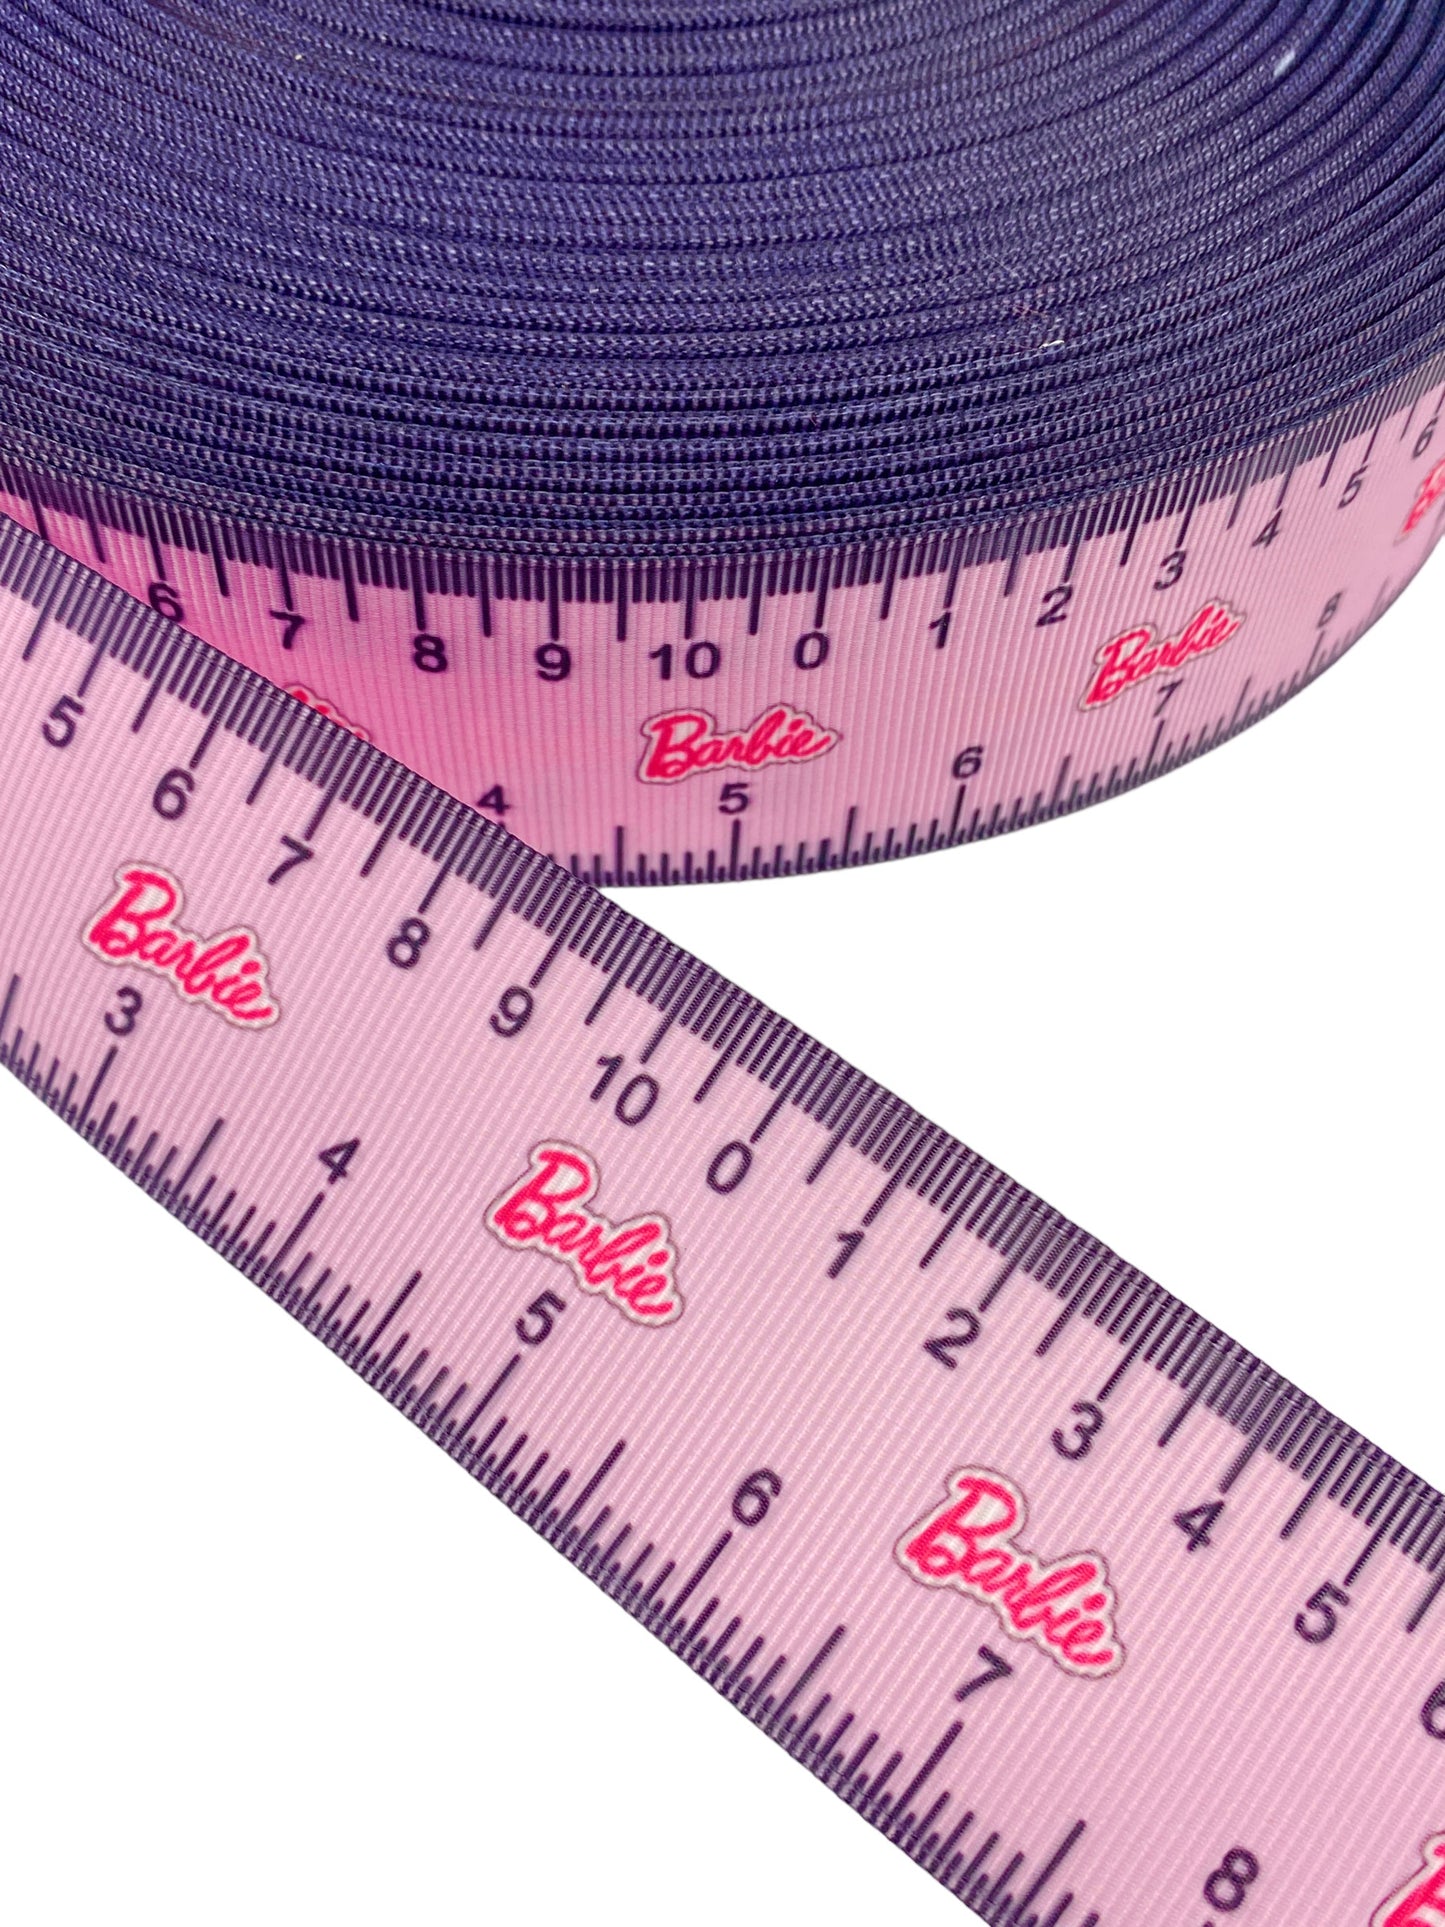 Barbie Ribbon, 38mm/1.5 inches